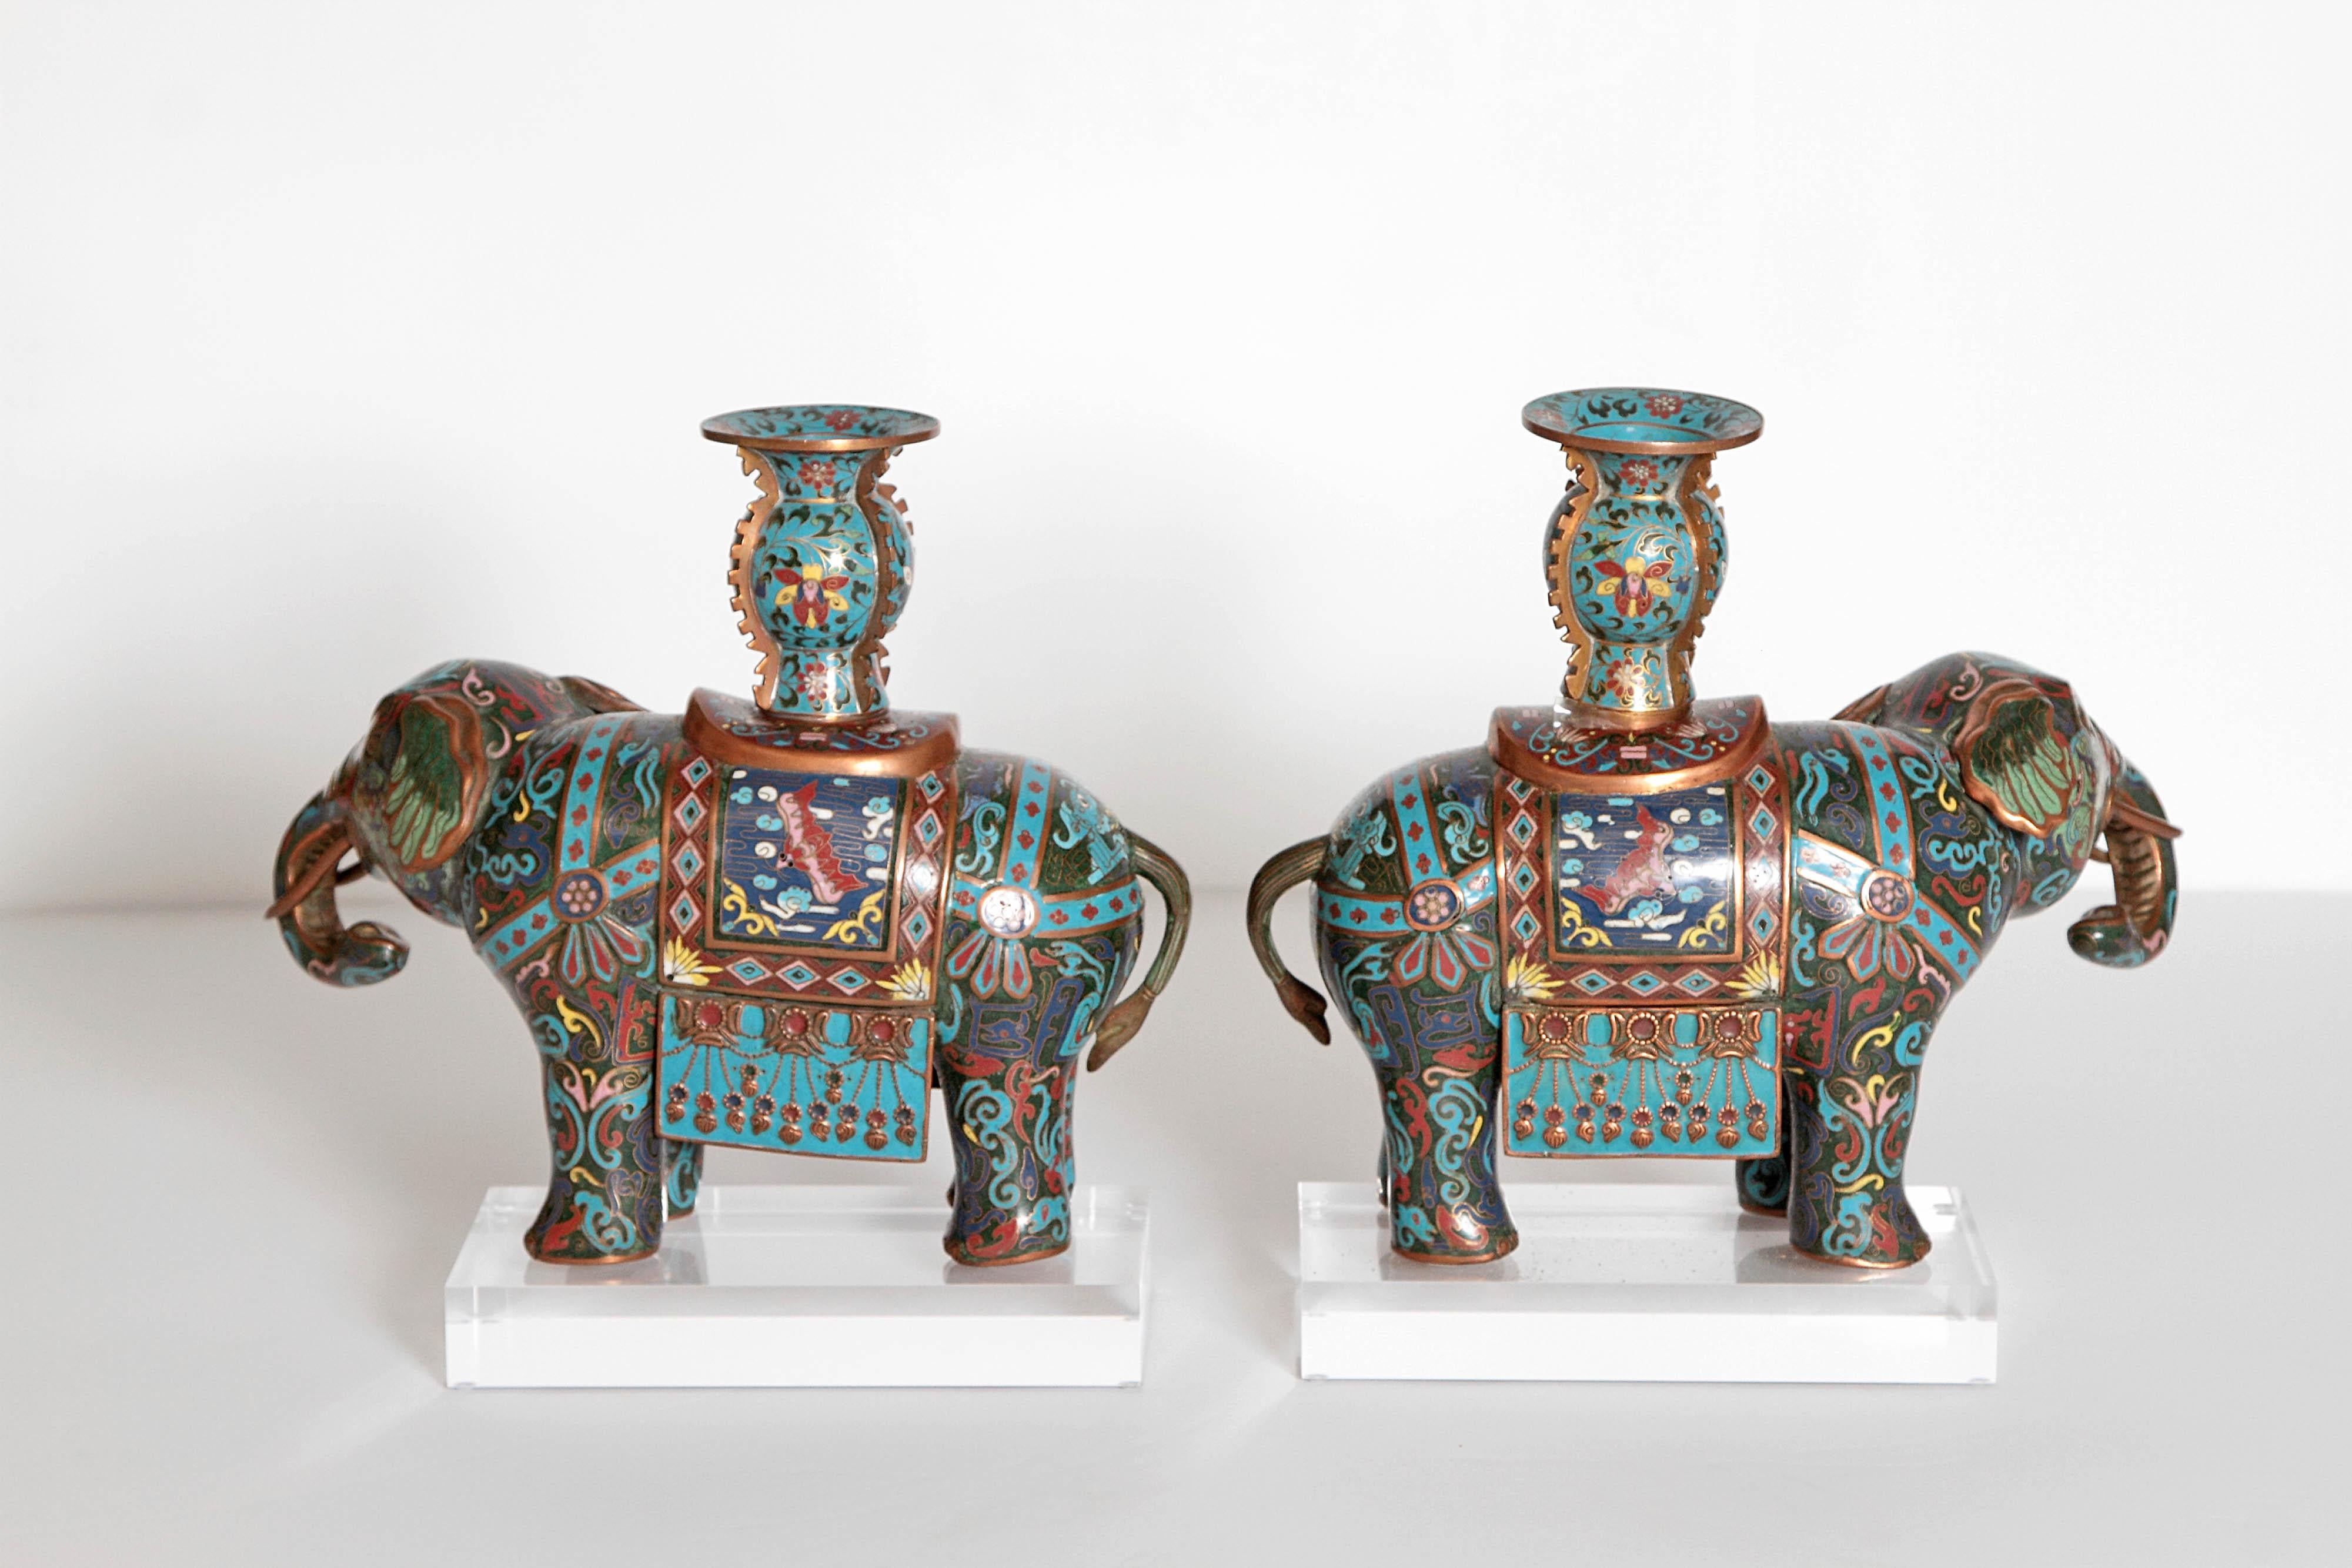 Pair of Chinese Cloisonne Elephants 1